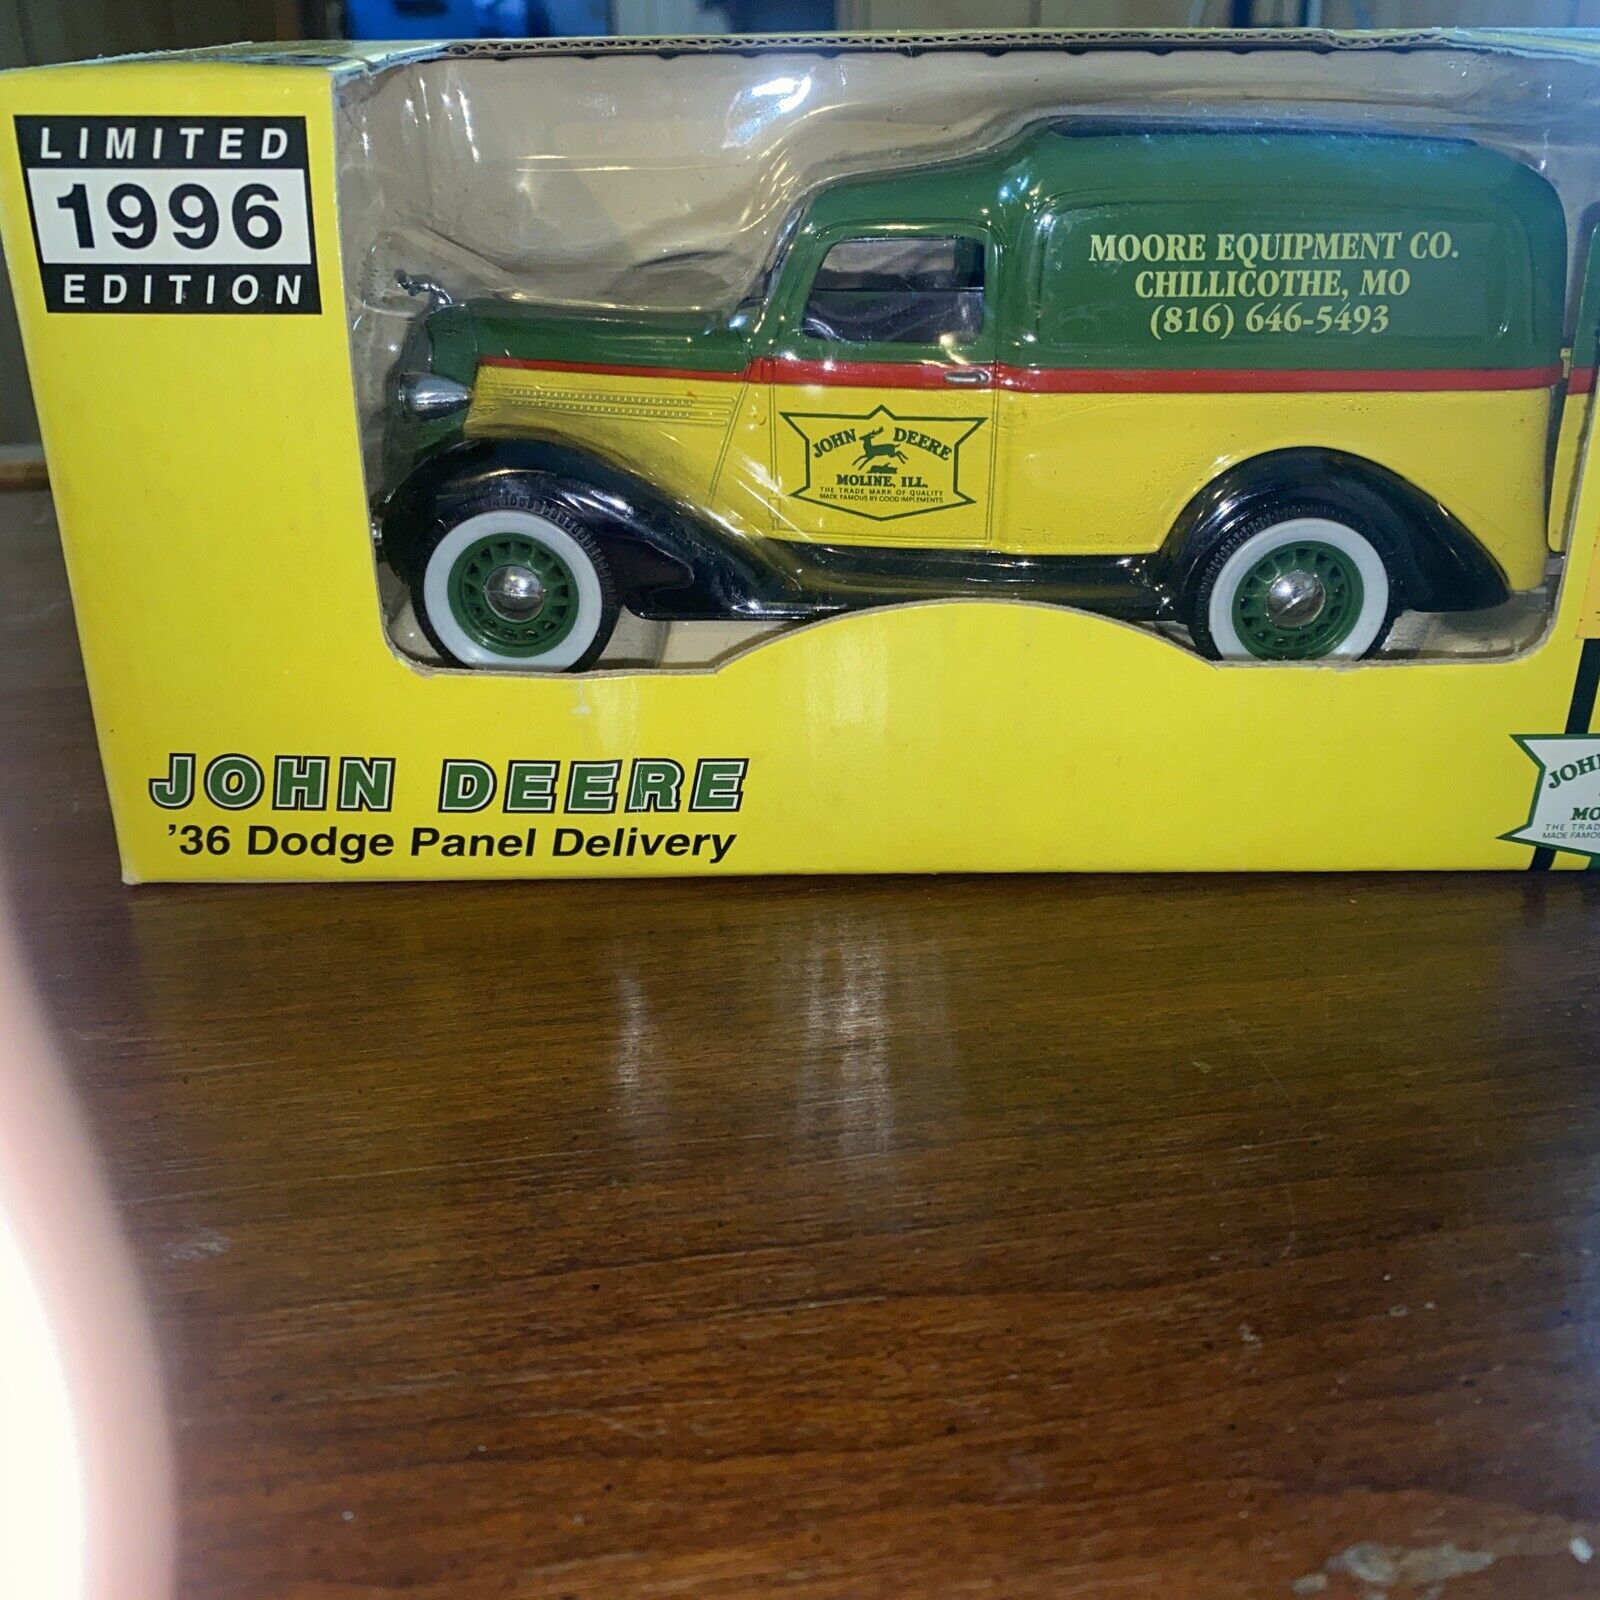 John Deere 1936 Dodge Panel Delivery Chillicothe, MO